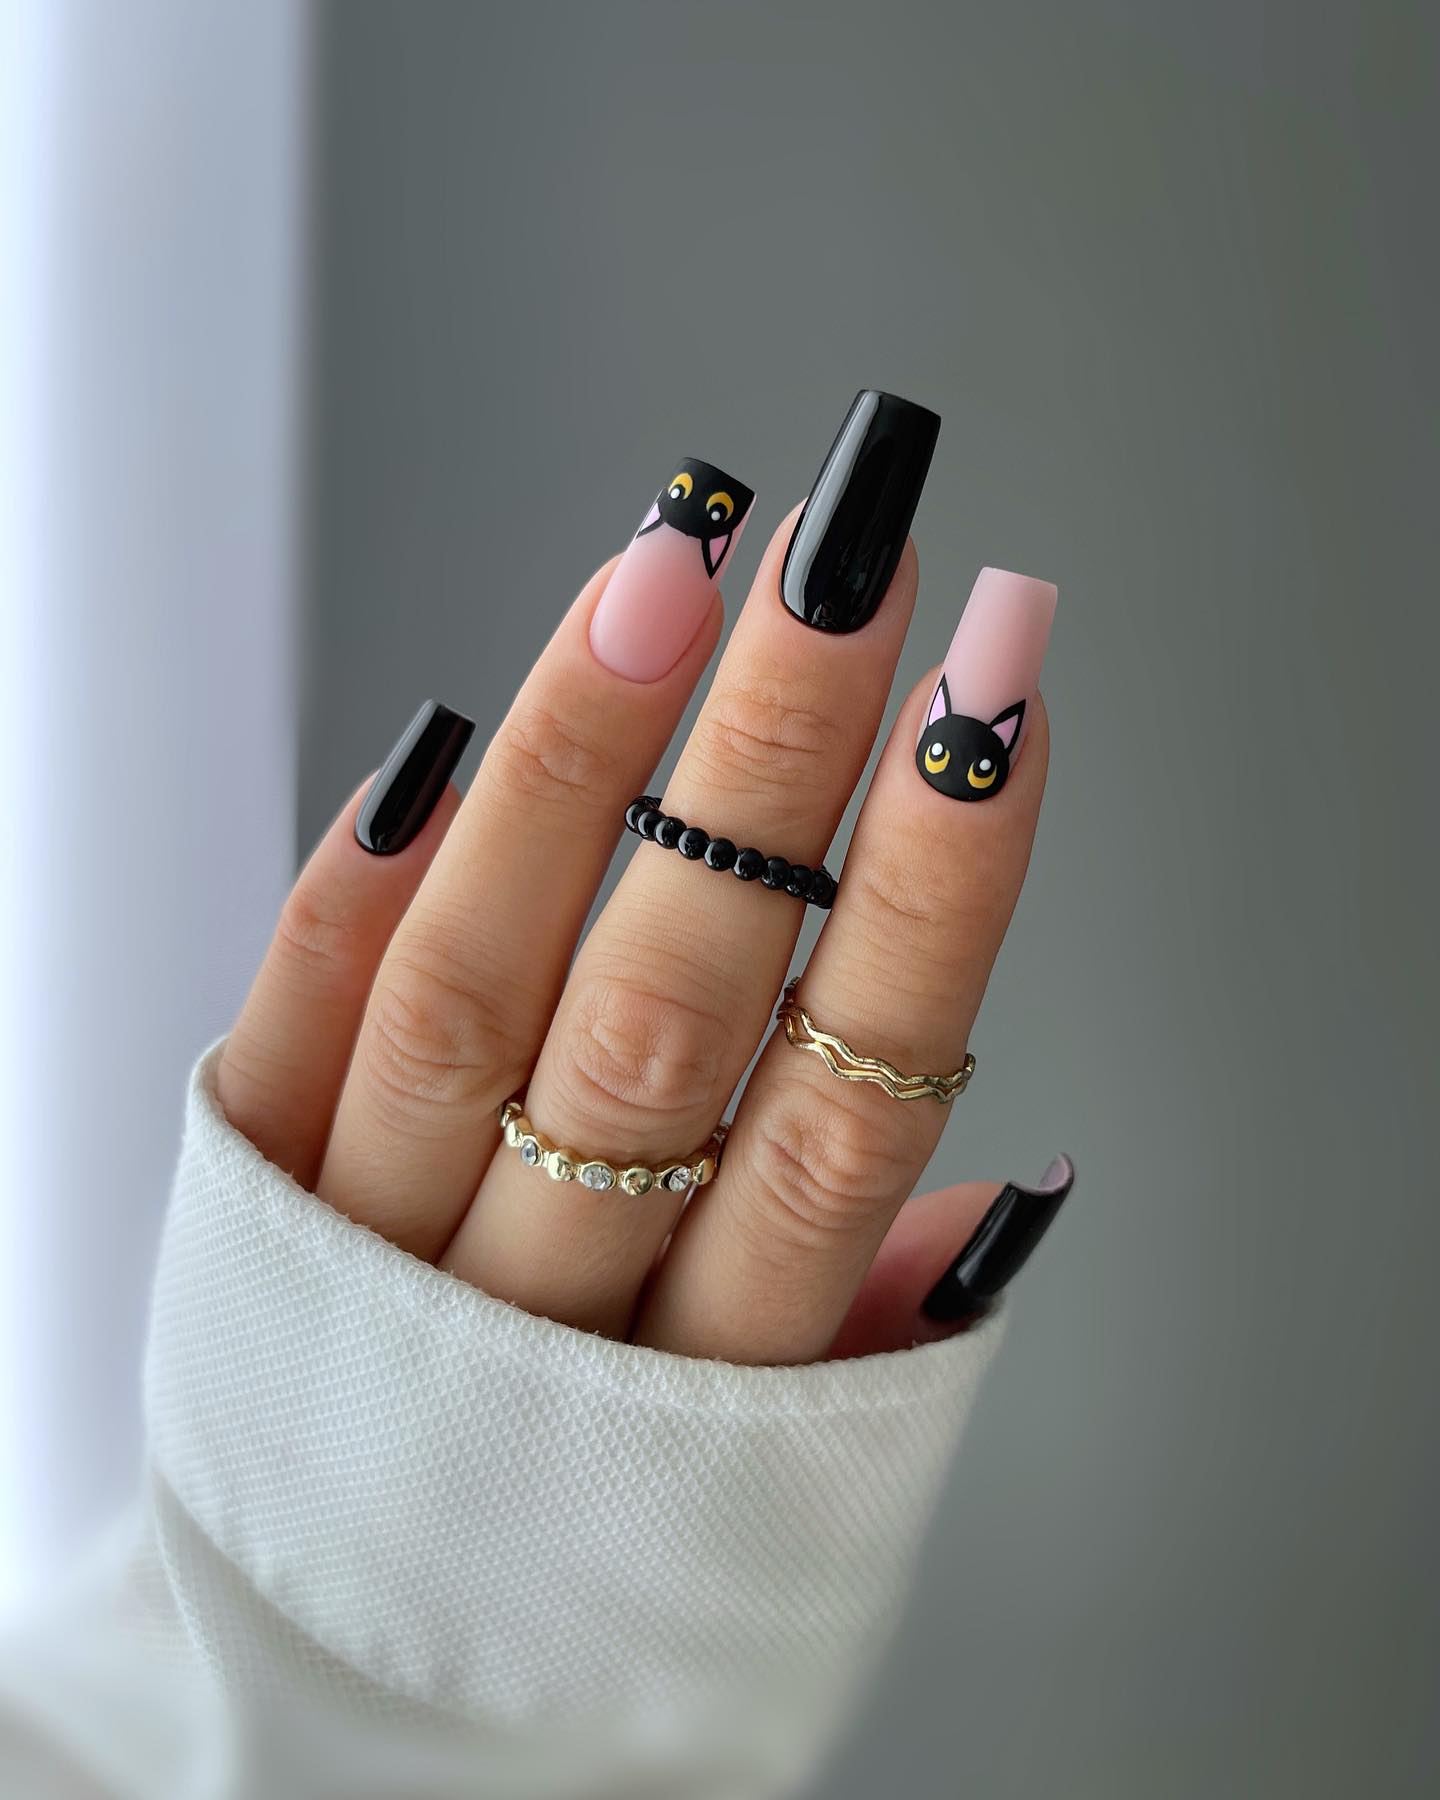 100+ Best Winter Nail Ideas And Designs To Try images 28